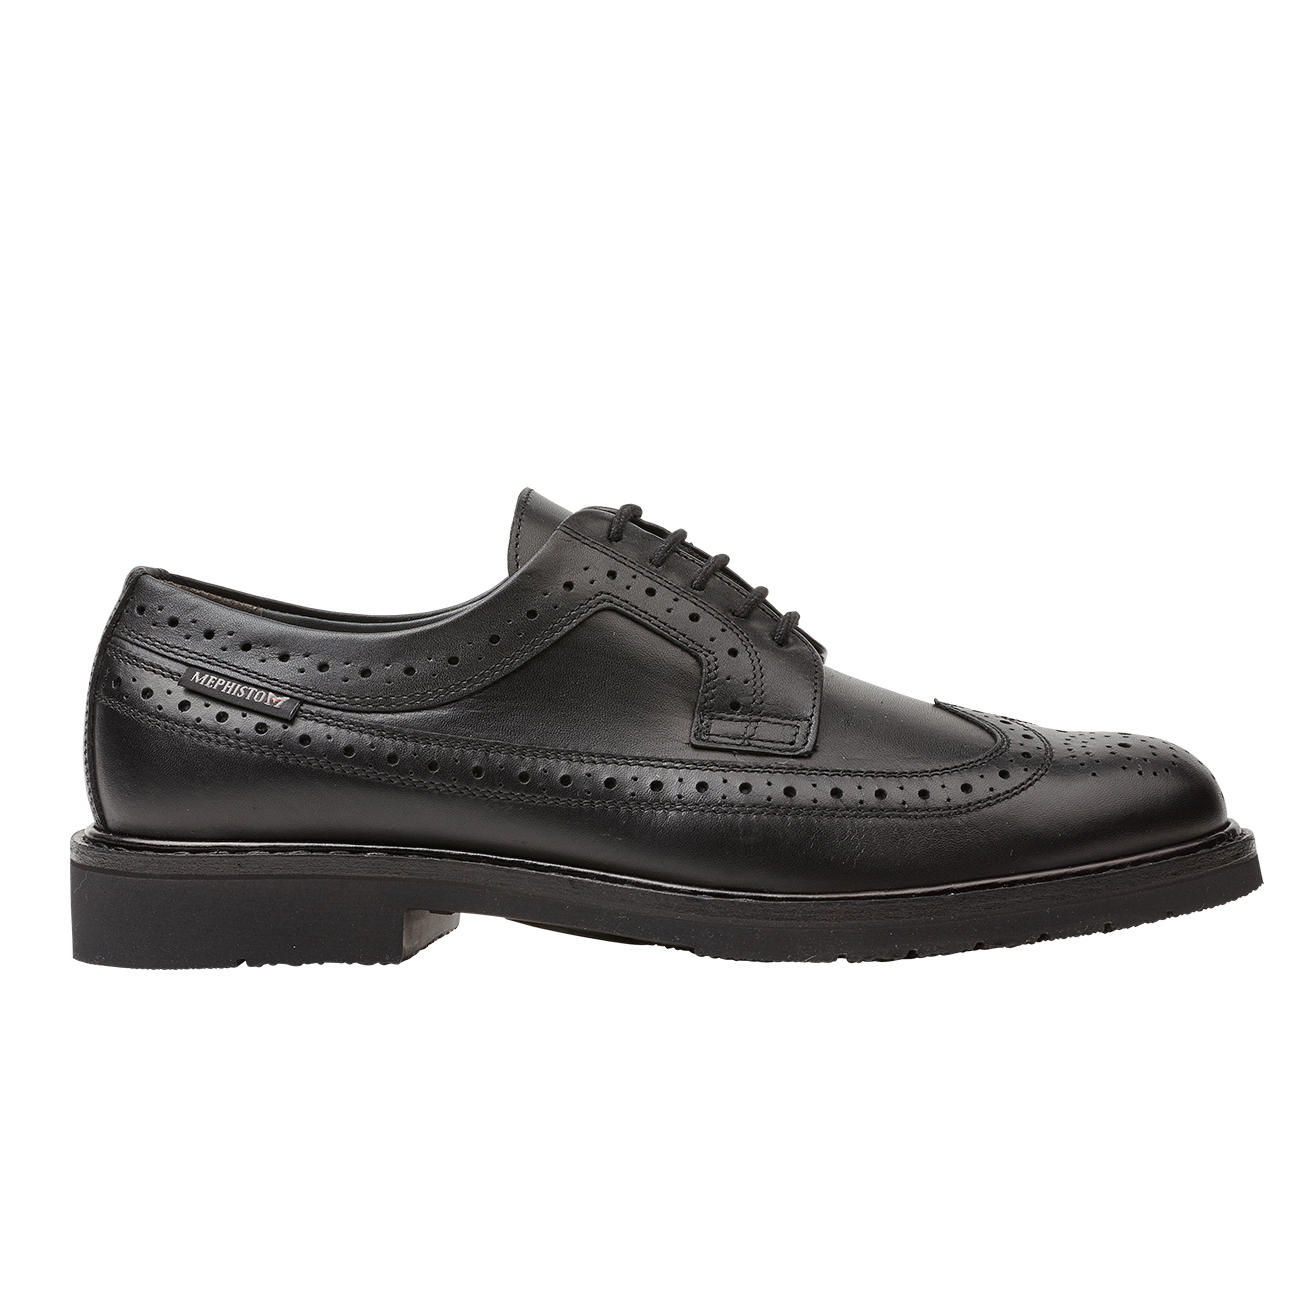 Mephisto Goodyear Wingtip or Derby discover